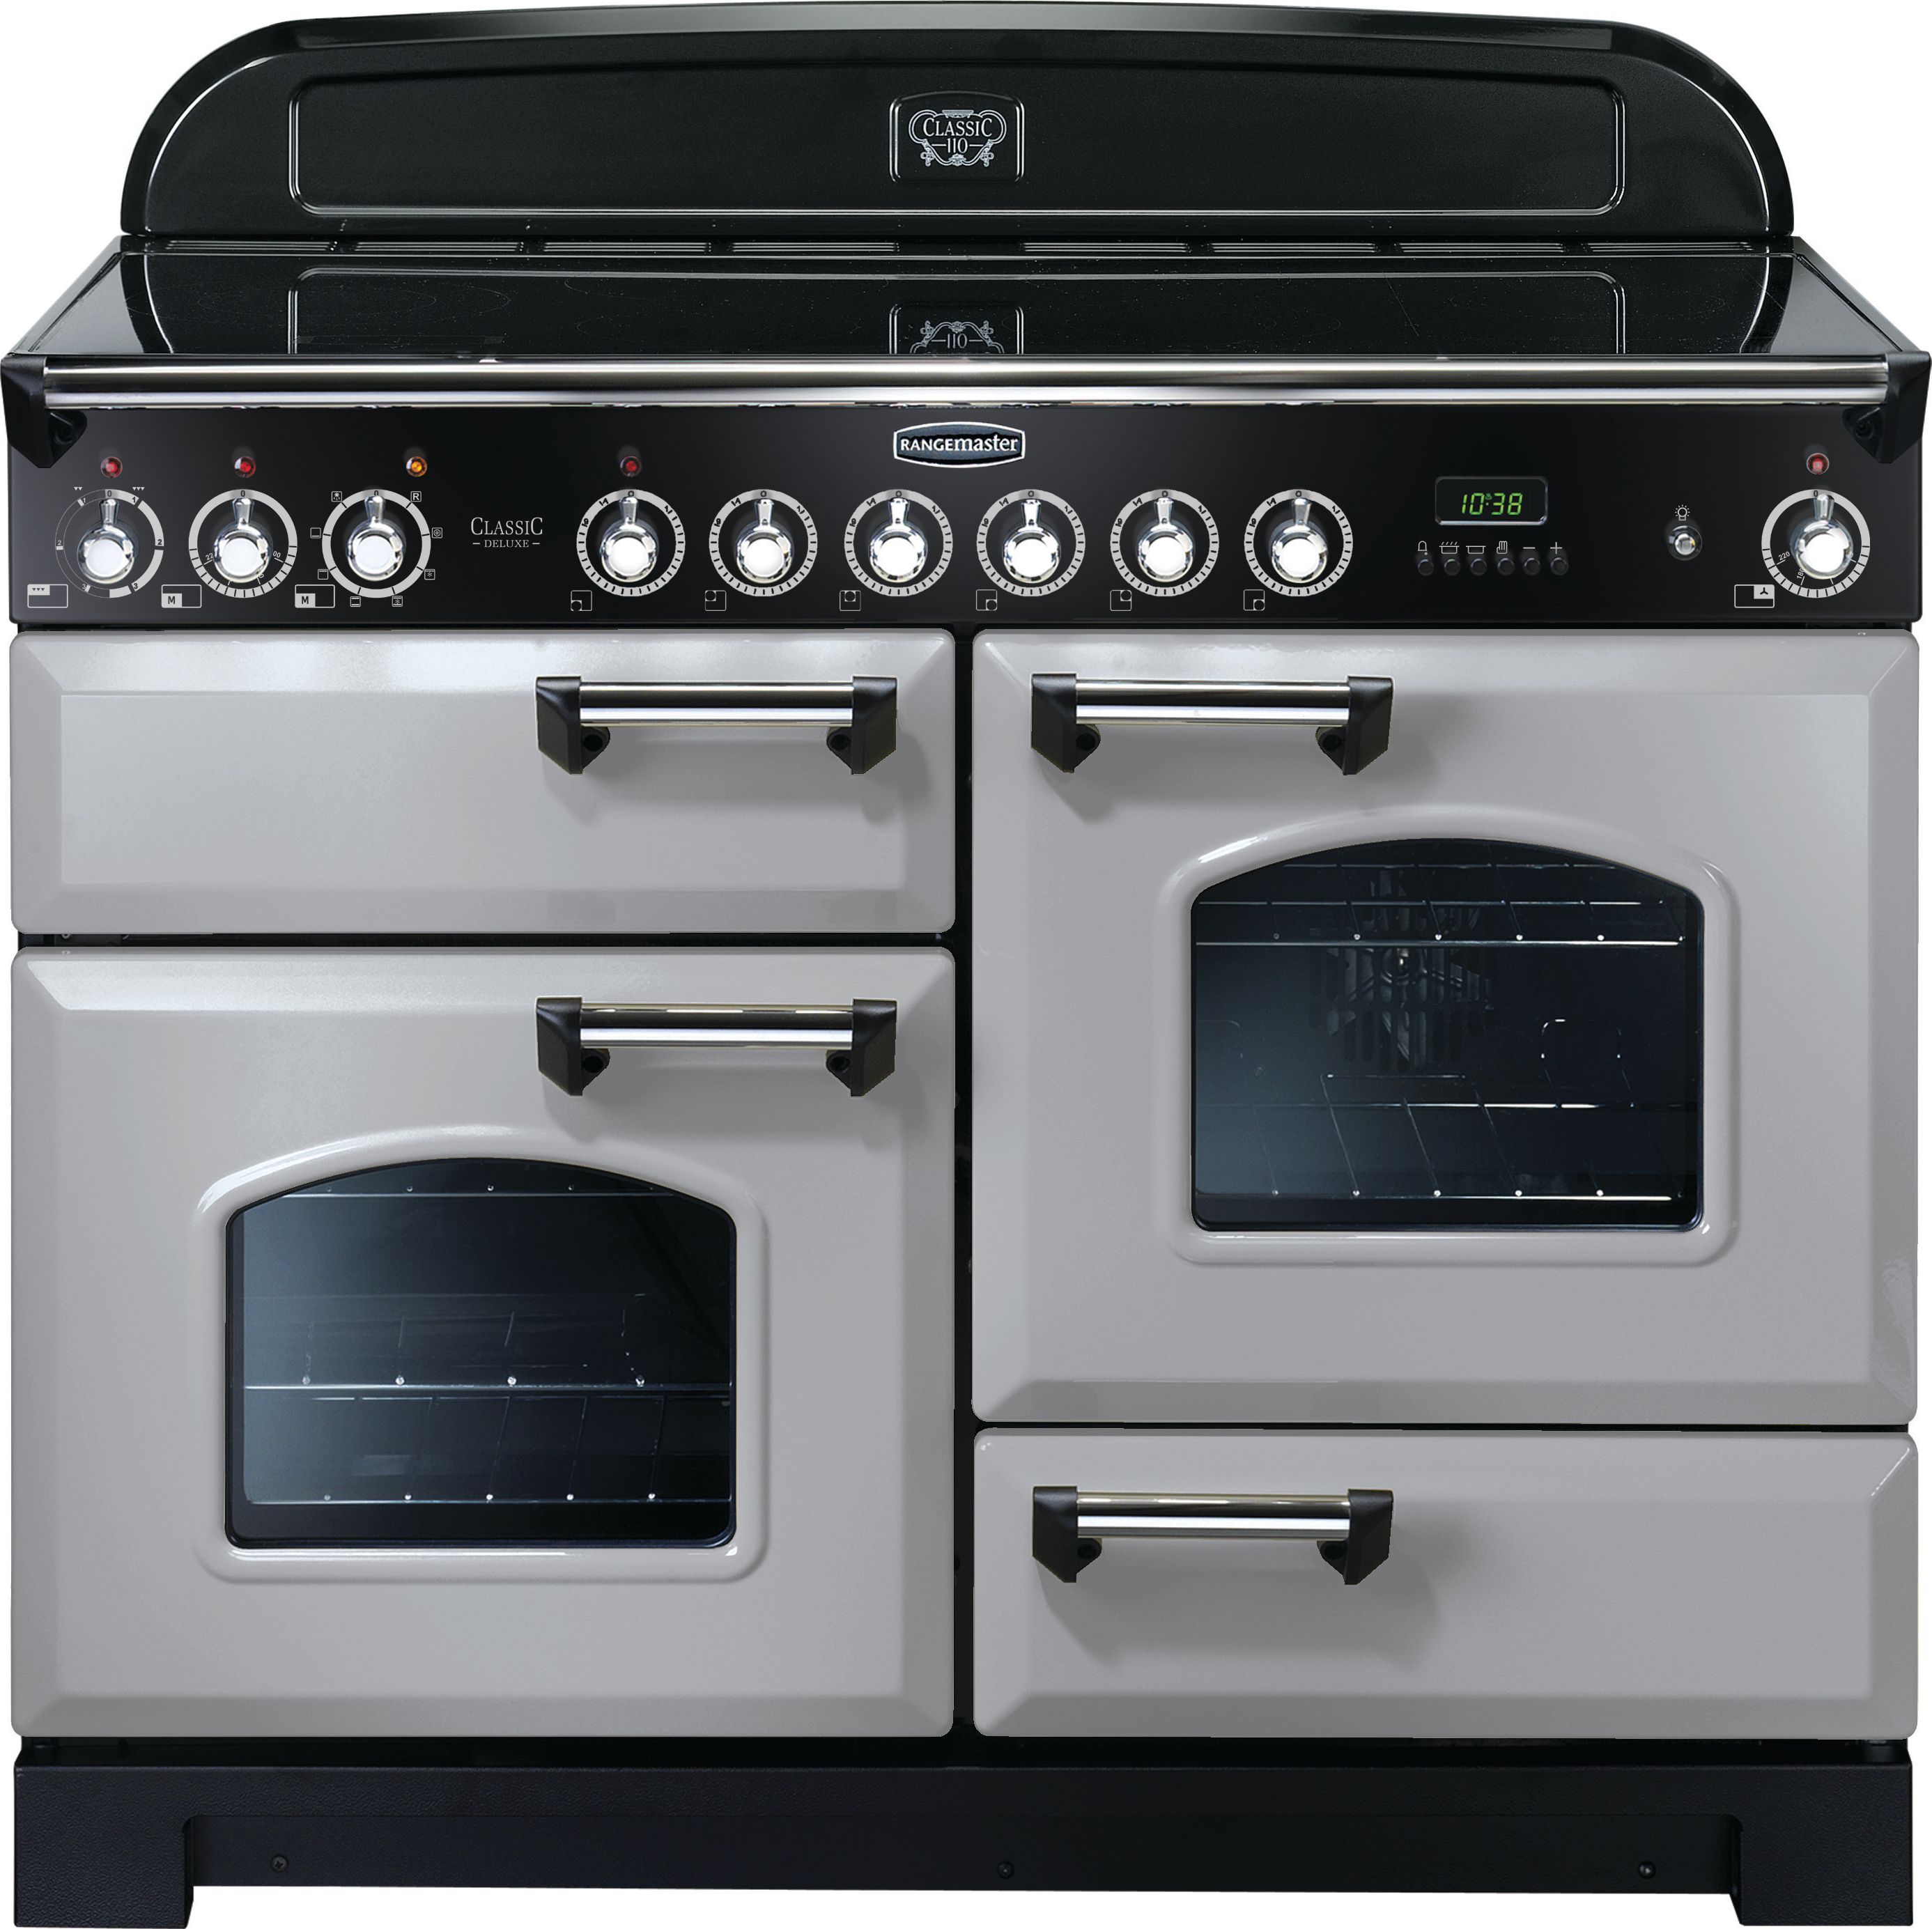 Rangemaster Classic Deluxe CDL110ECRP/C 110cm Electric Range Cooker with Ceramic Hob - Royal Pearl / Chrome - A/A Rated, Grey